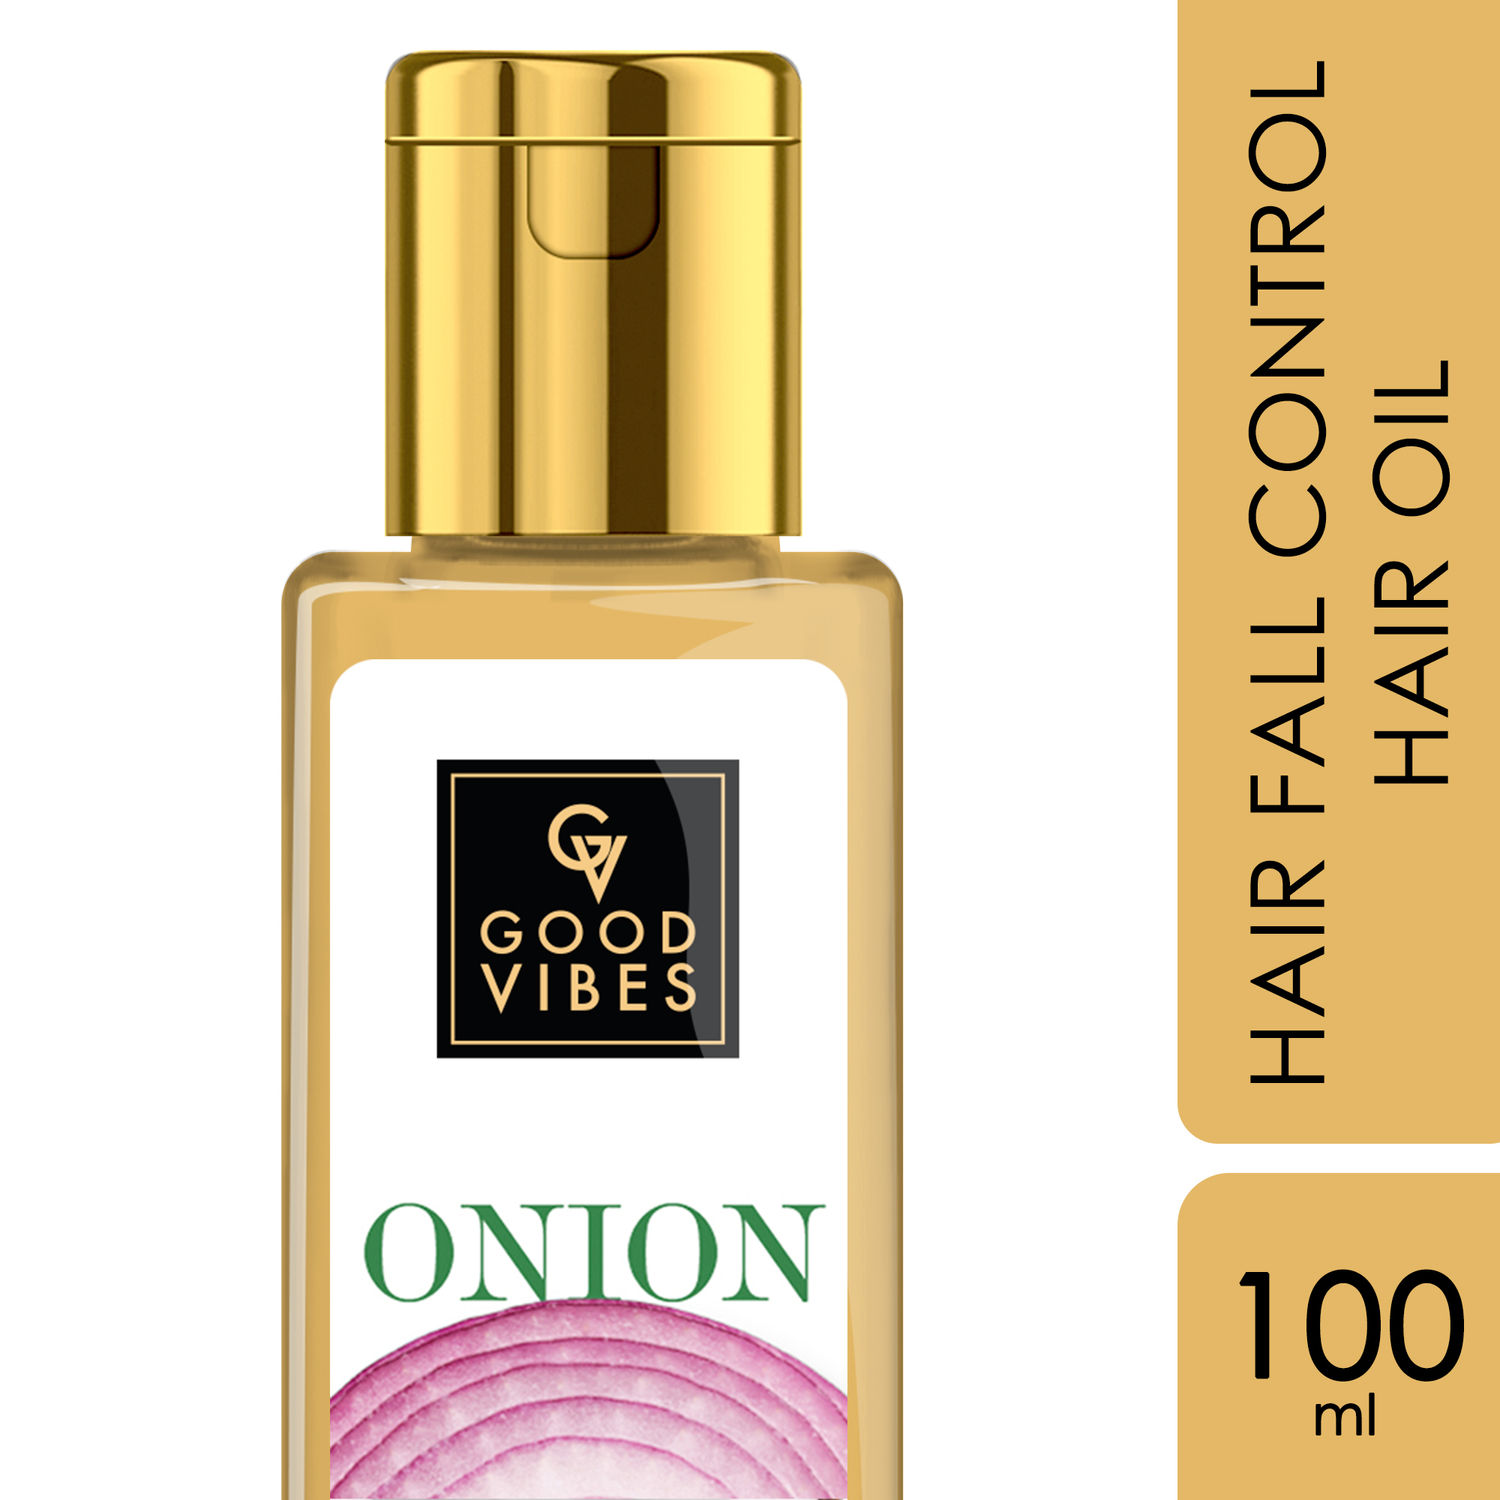 Buy Good Vibes Onion Hairfall Control Oil | Strengthening | Hair Growth | No Parabens, No Sulphates, No Mineral Oil, No Animal Testing (100 ml) - Purplle